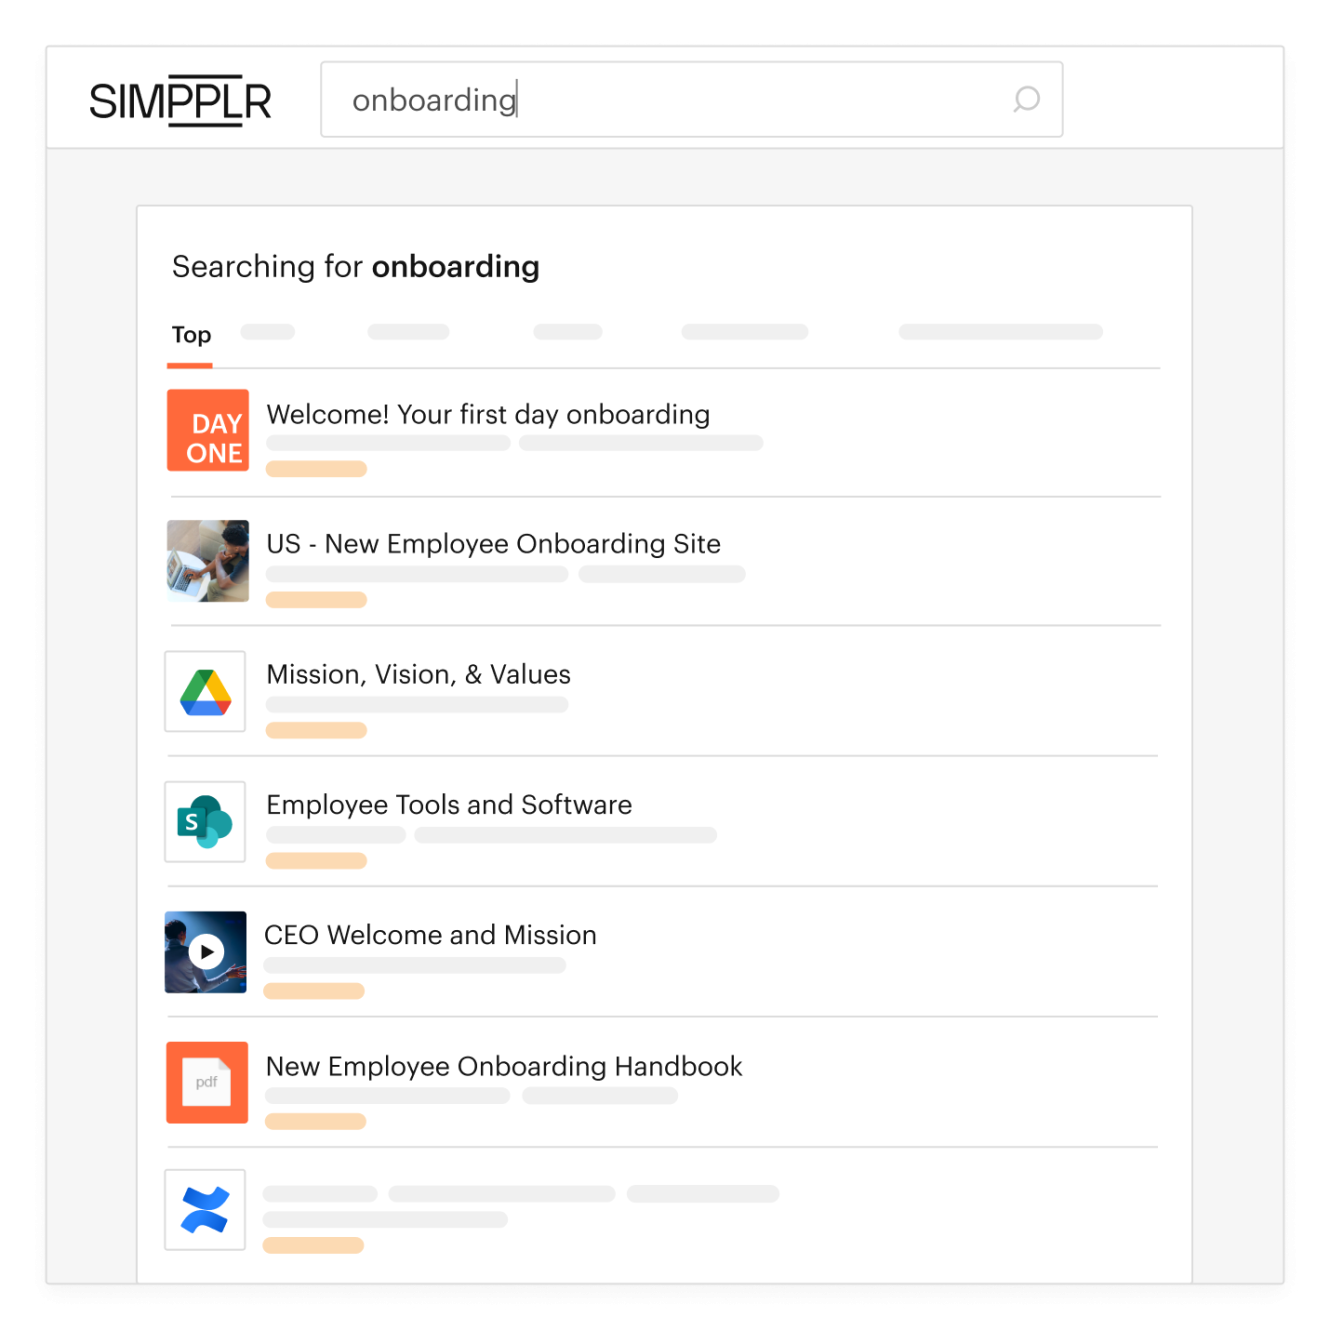 Simpplr Smart Search : Return personalized results based on popularity and search patterns across all your cloud-based systems